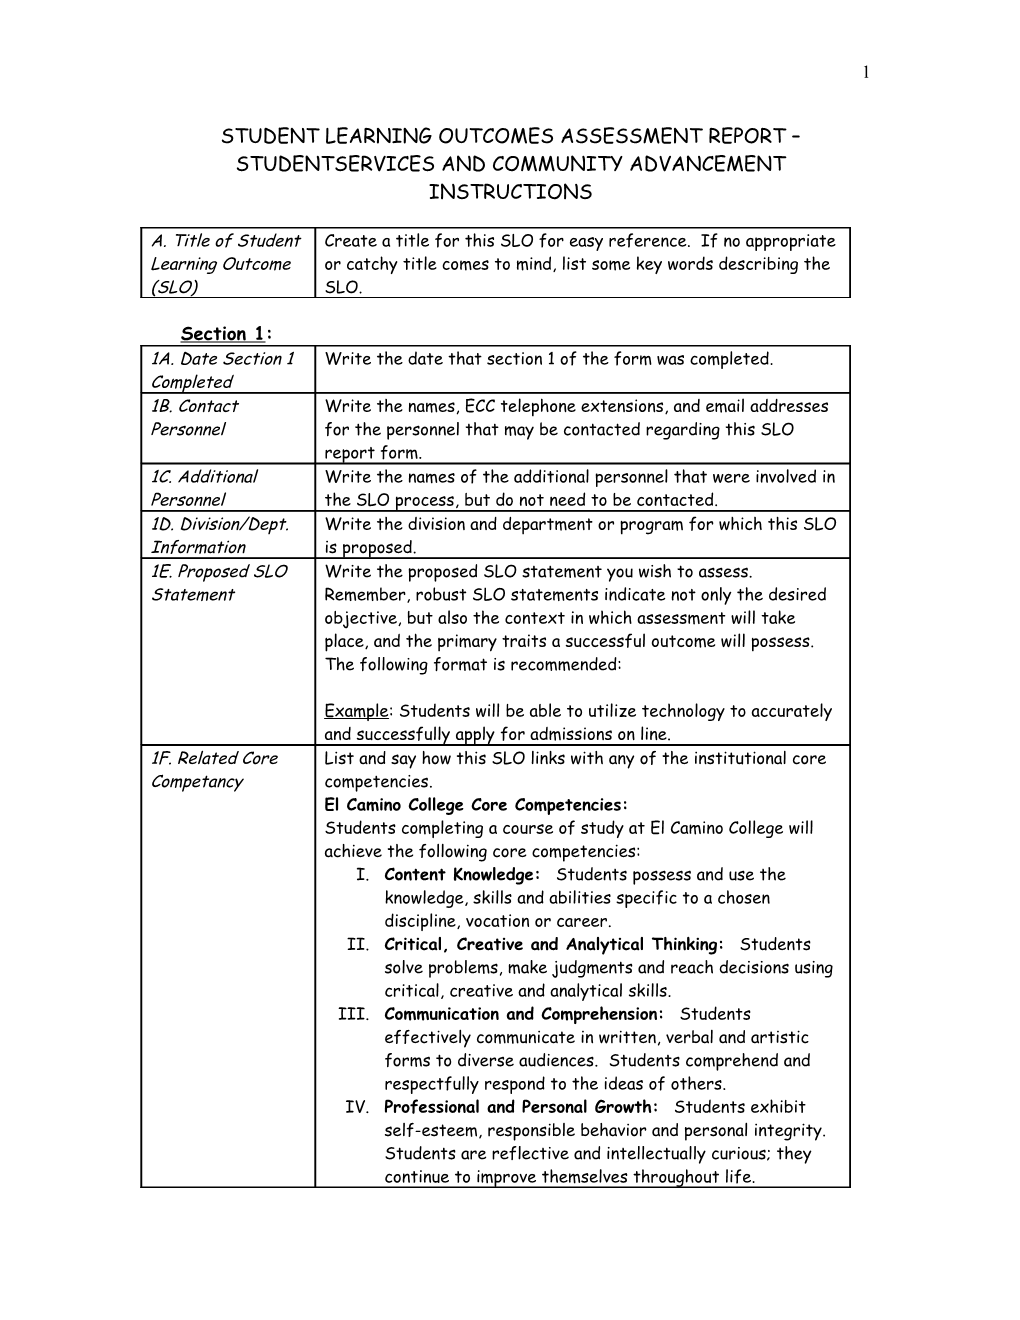 Student Learning Outcomes Assessment Report Studentservices and Community Advancement s1